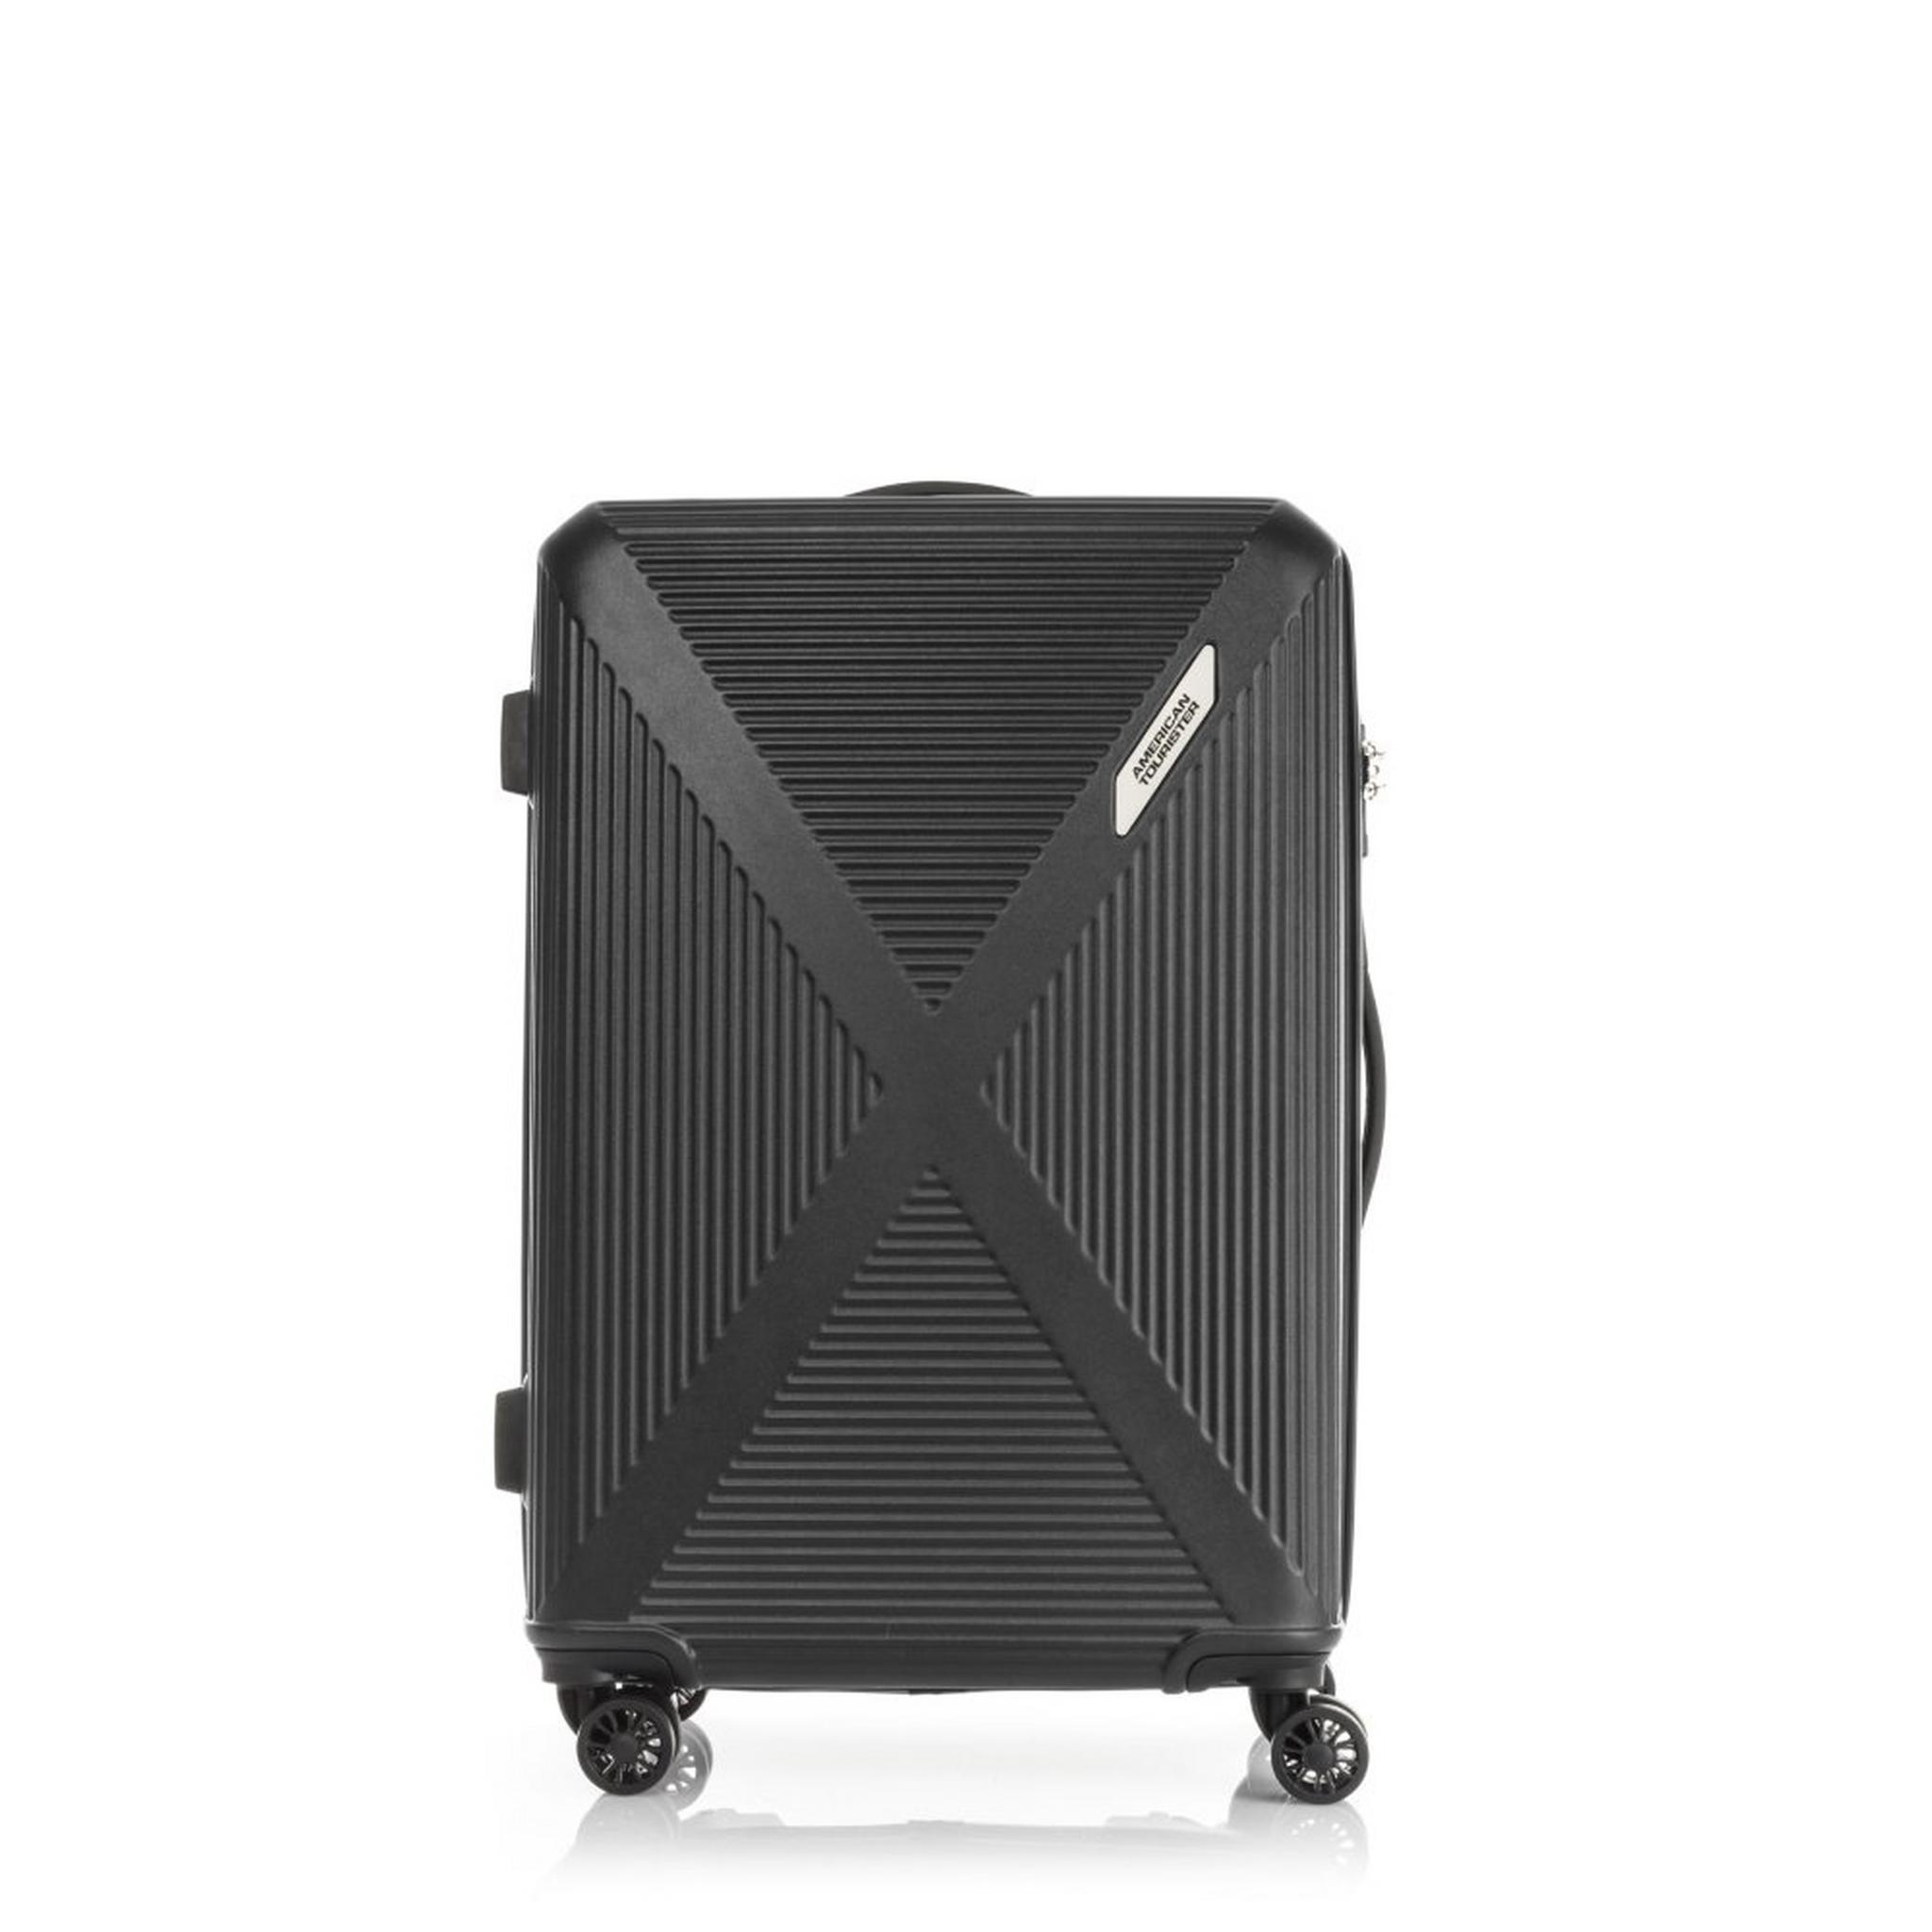 AMERICAN TOURISTER CUATRO Hard Luggage with Spinner Wheels, 68 CM, HN1X09002 – Black